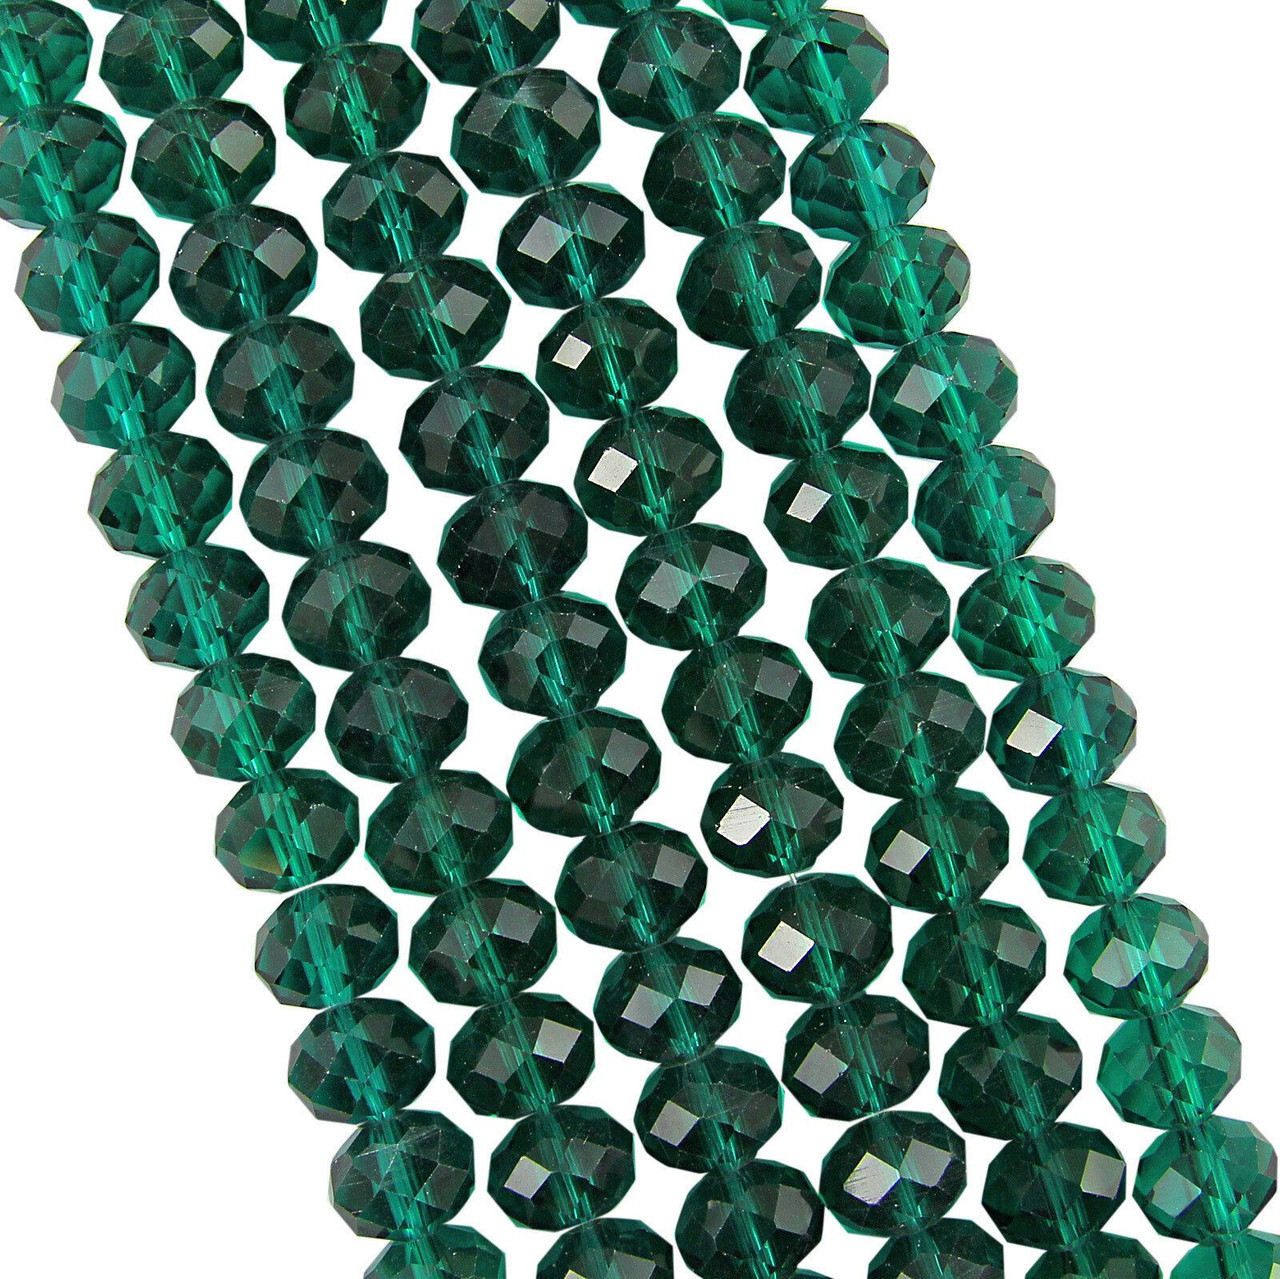 Teal 12x9mm Faceted Glass Rondelles